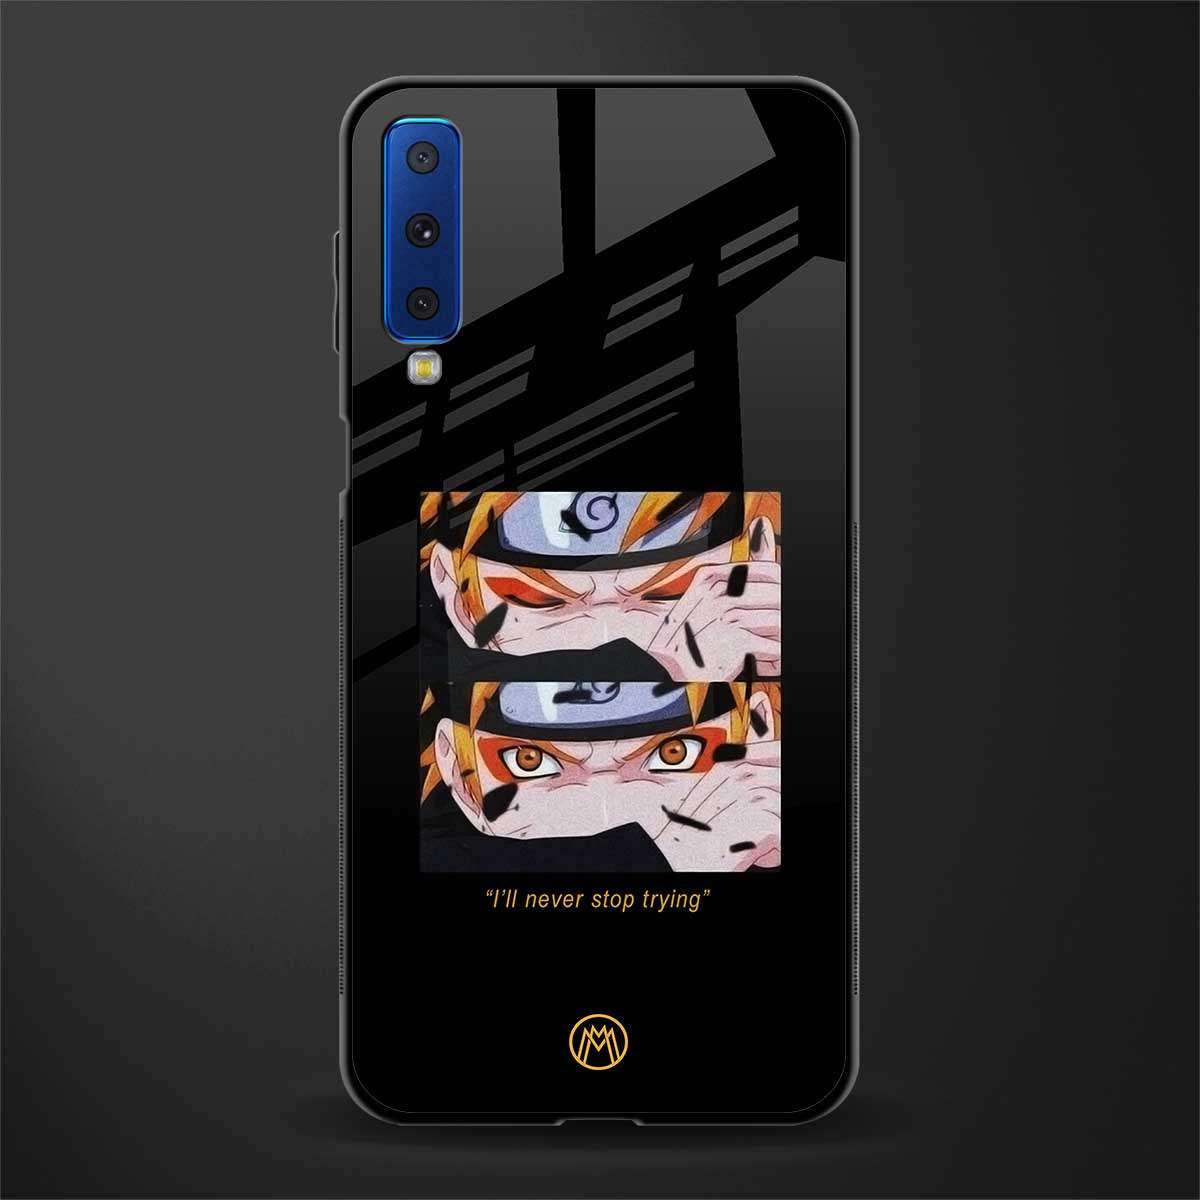 naruto motivation anime glass case for samsung galaxy a7 2018 image